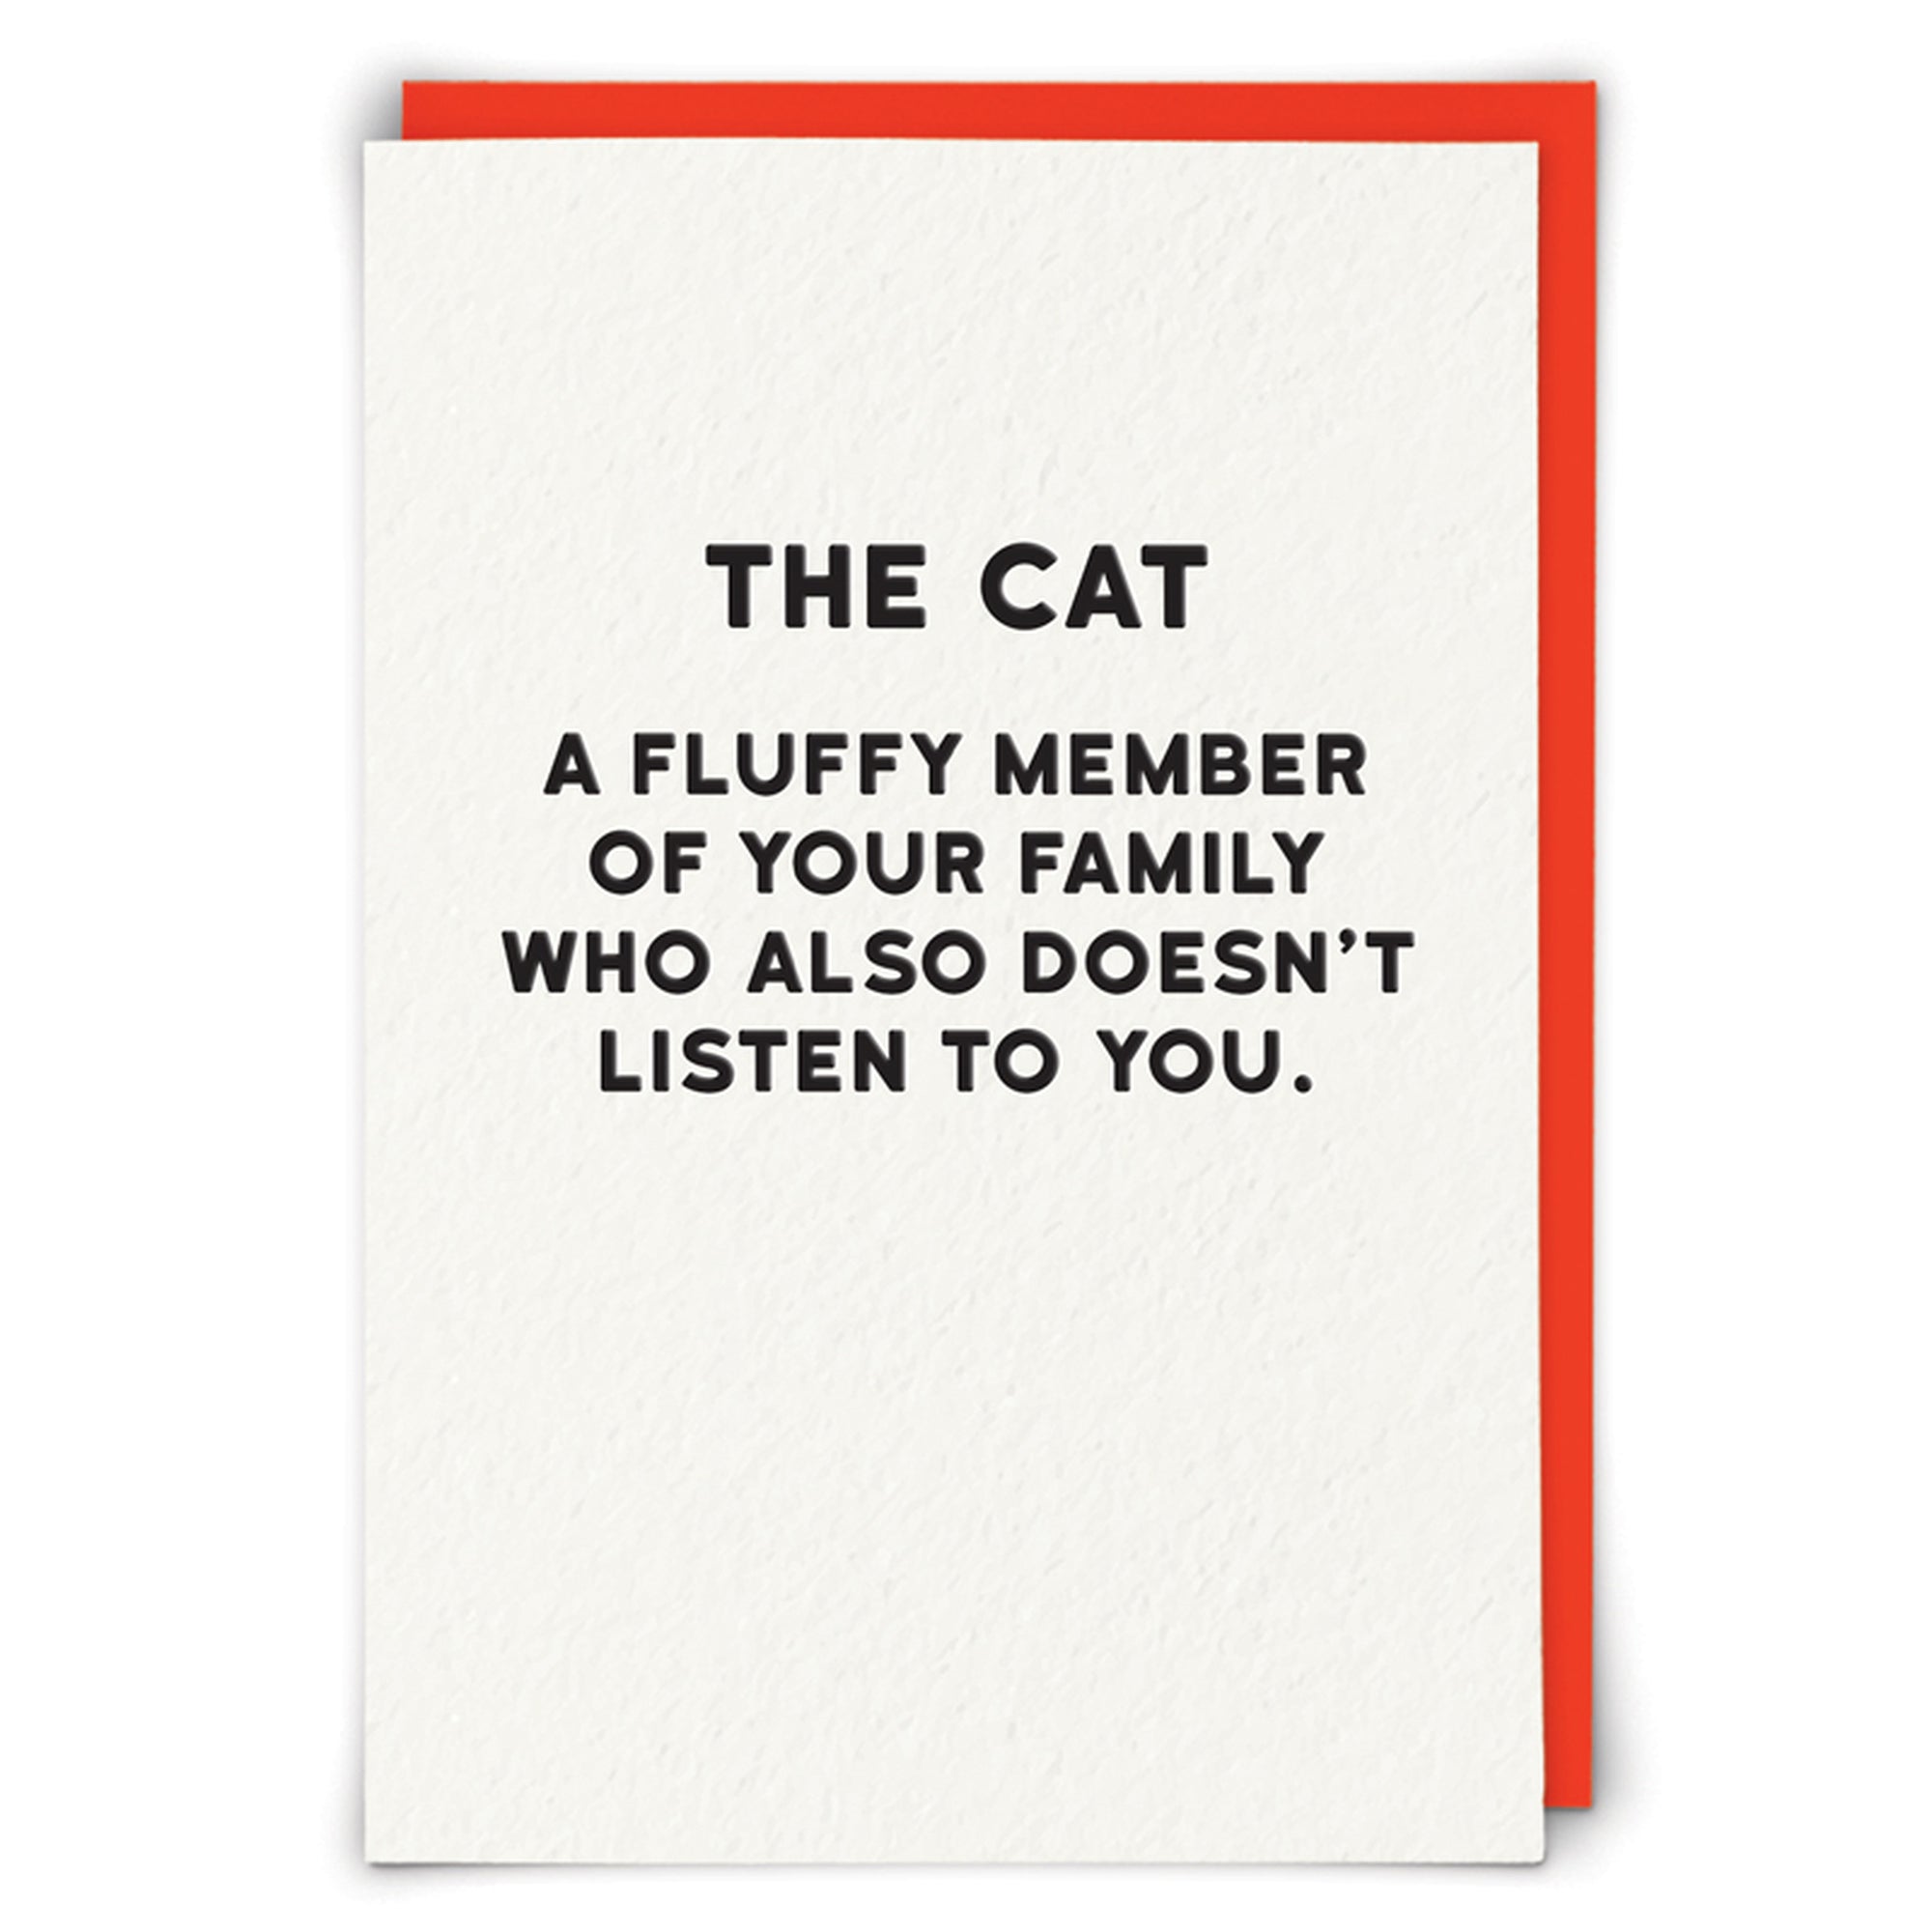 The Cat Doesn't Listen Funny Card from Penny Black